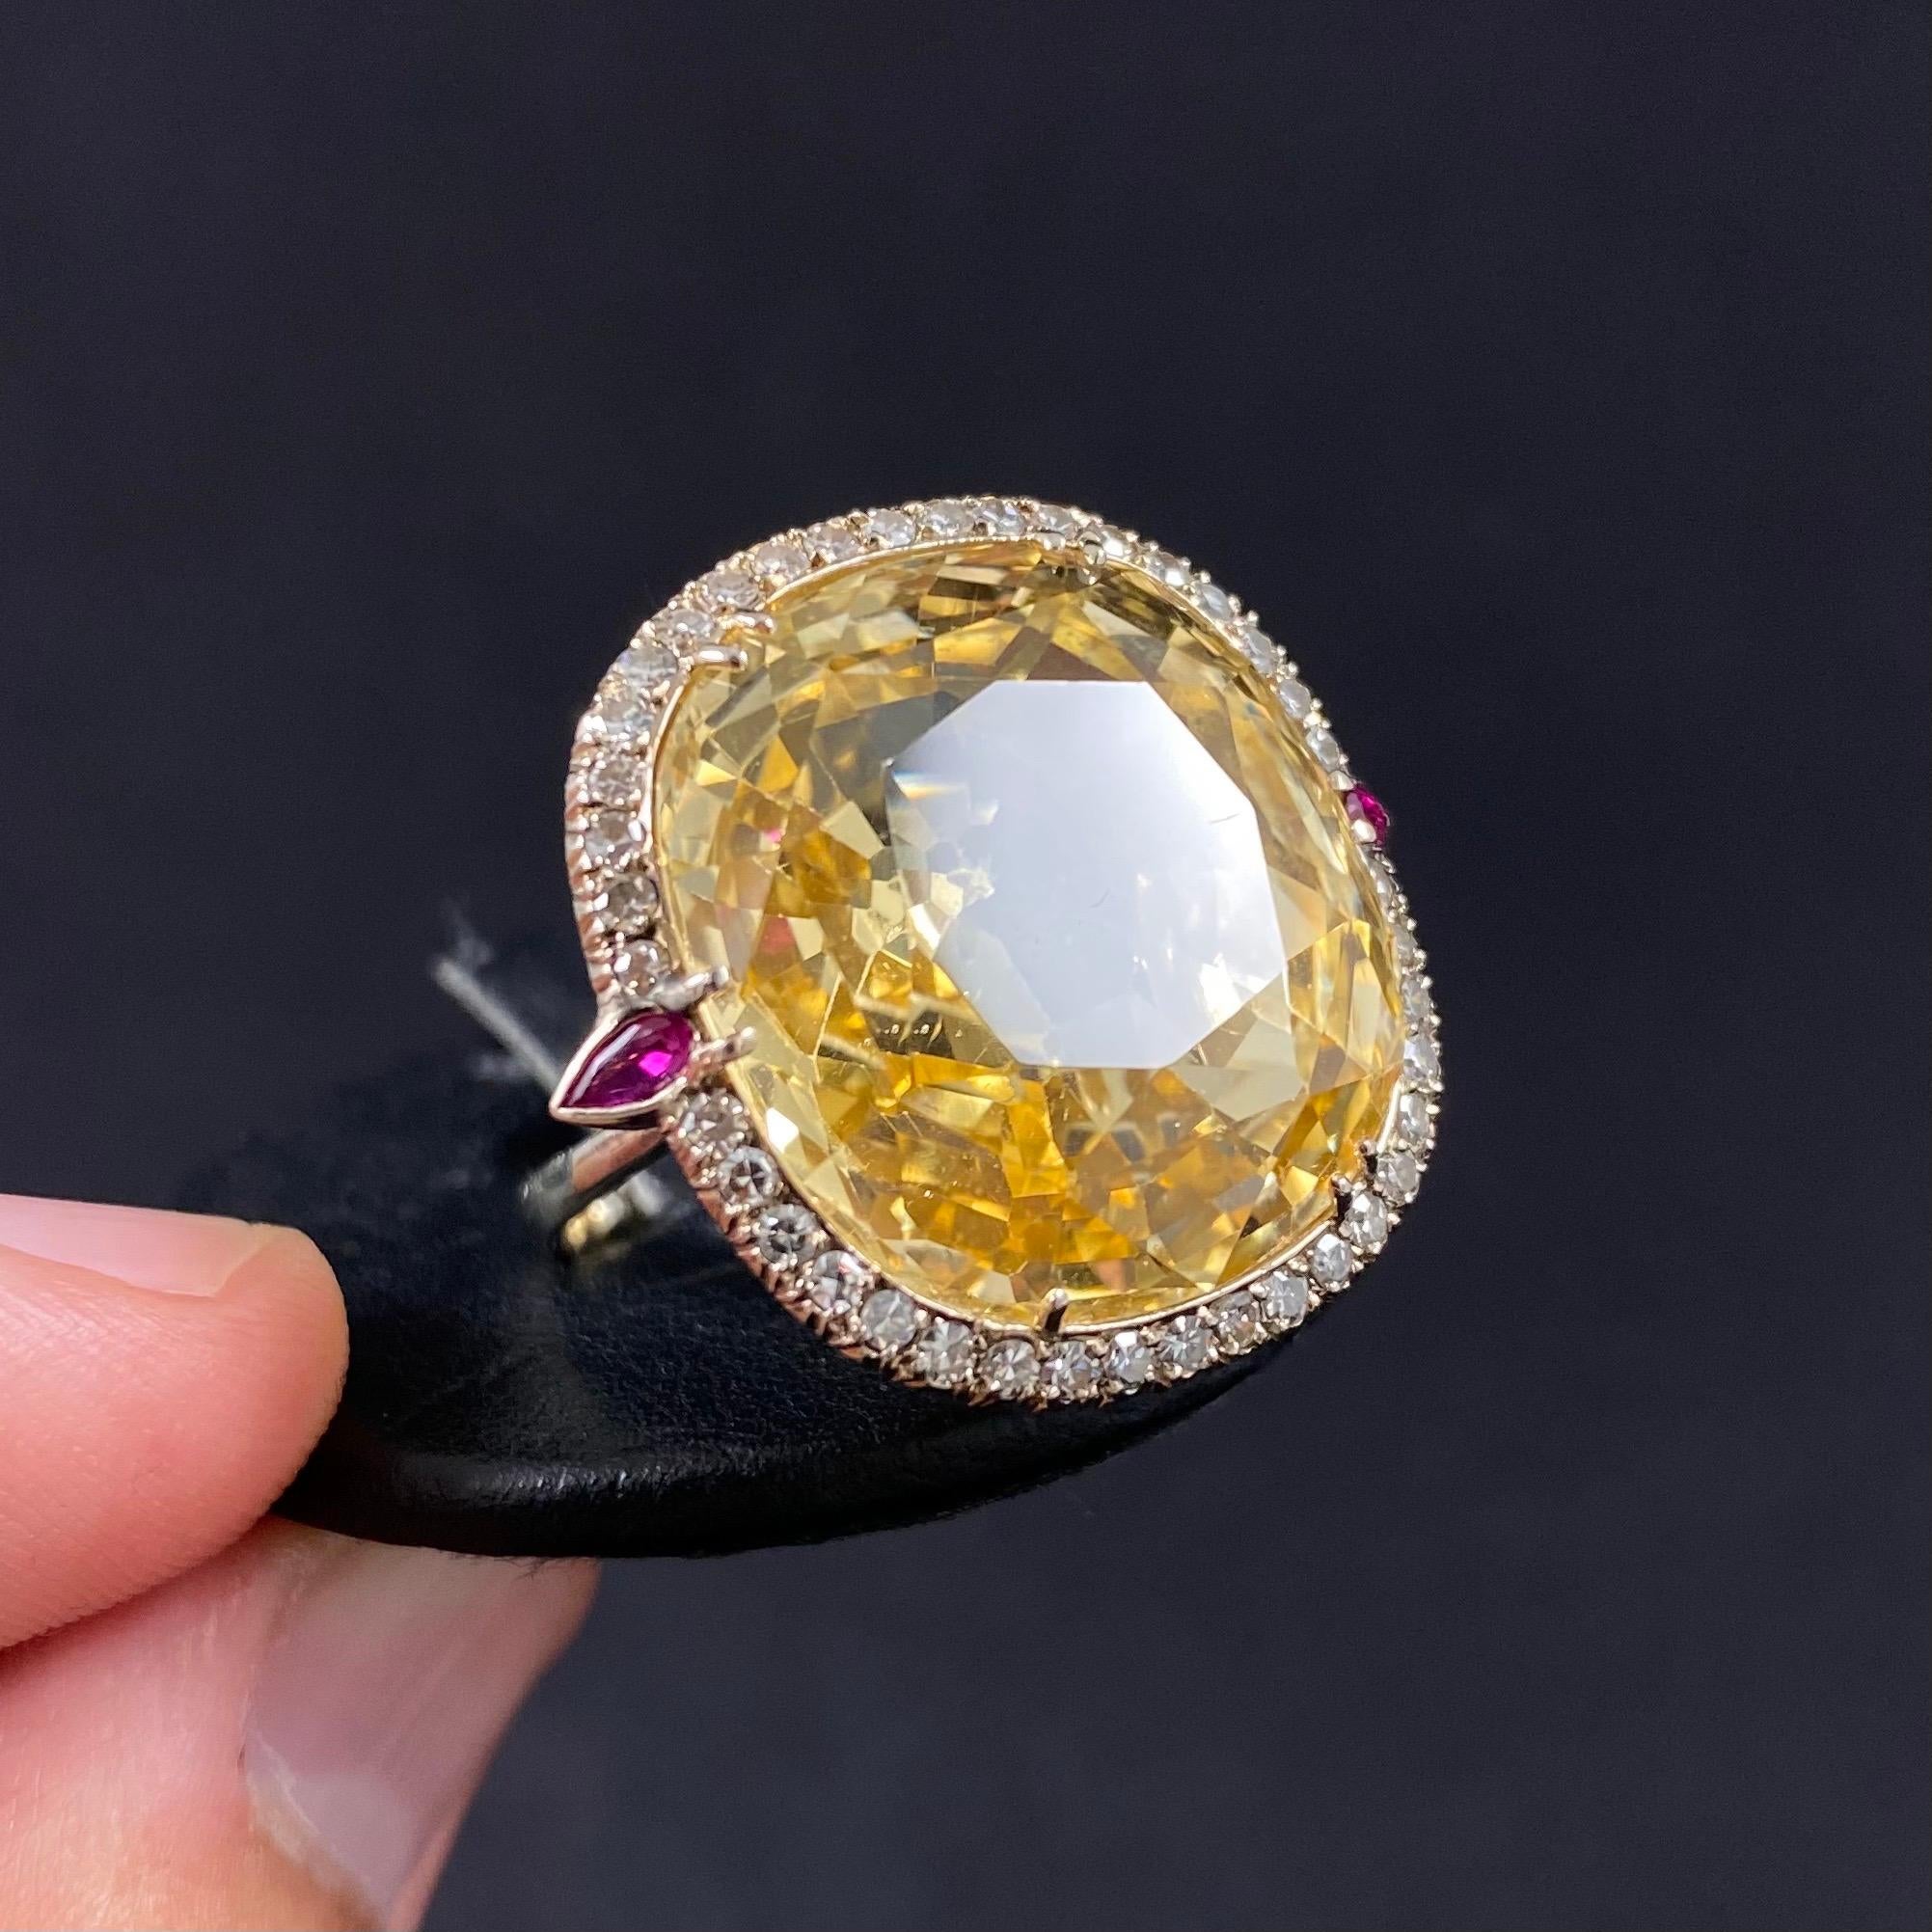 Women's or Men's Certified 40 Carat Natural Unheated Ceylon Yellow Sapphire Diamond Cocktail Ring For Sale